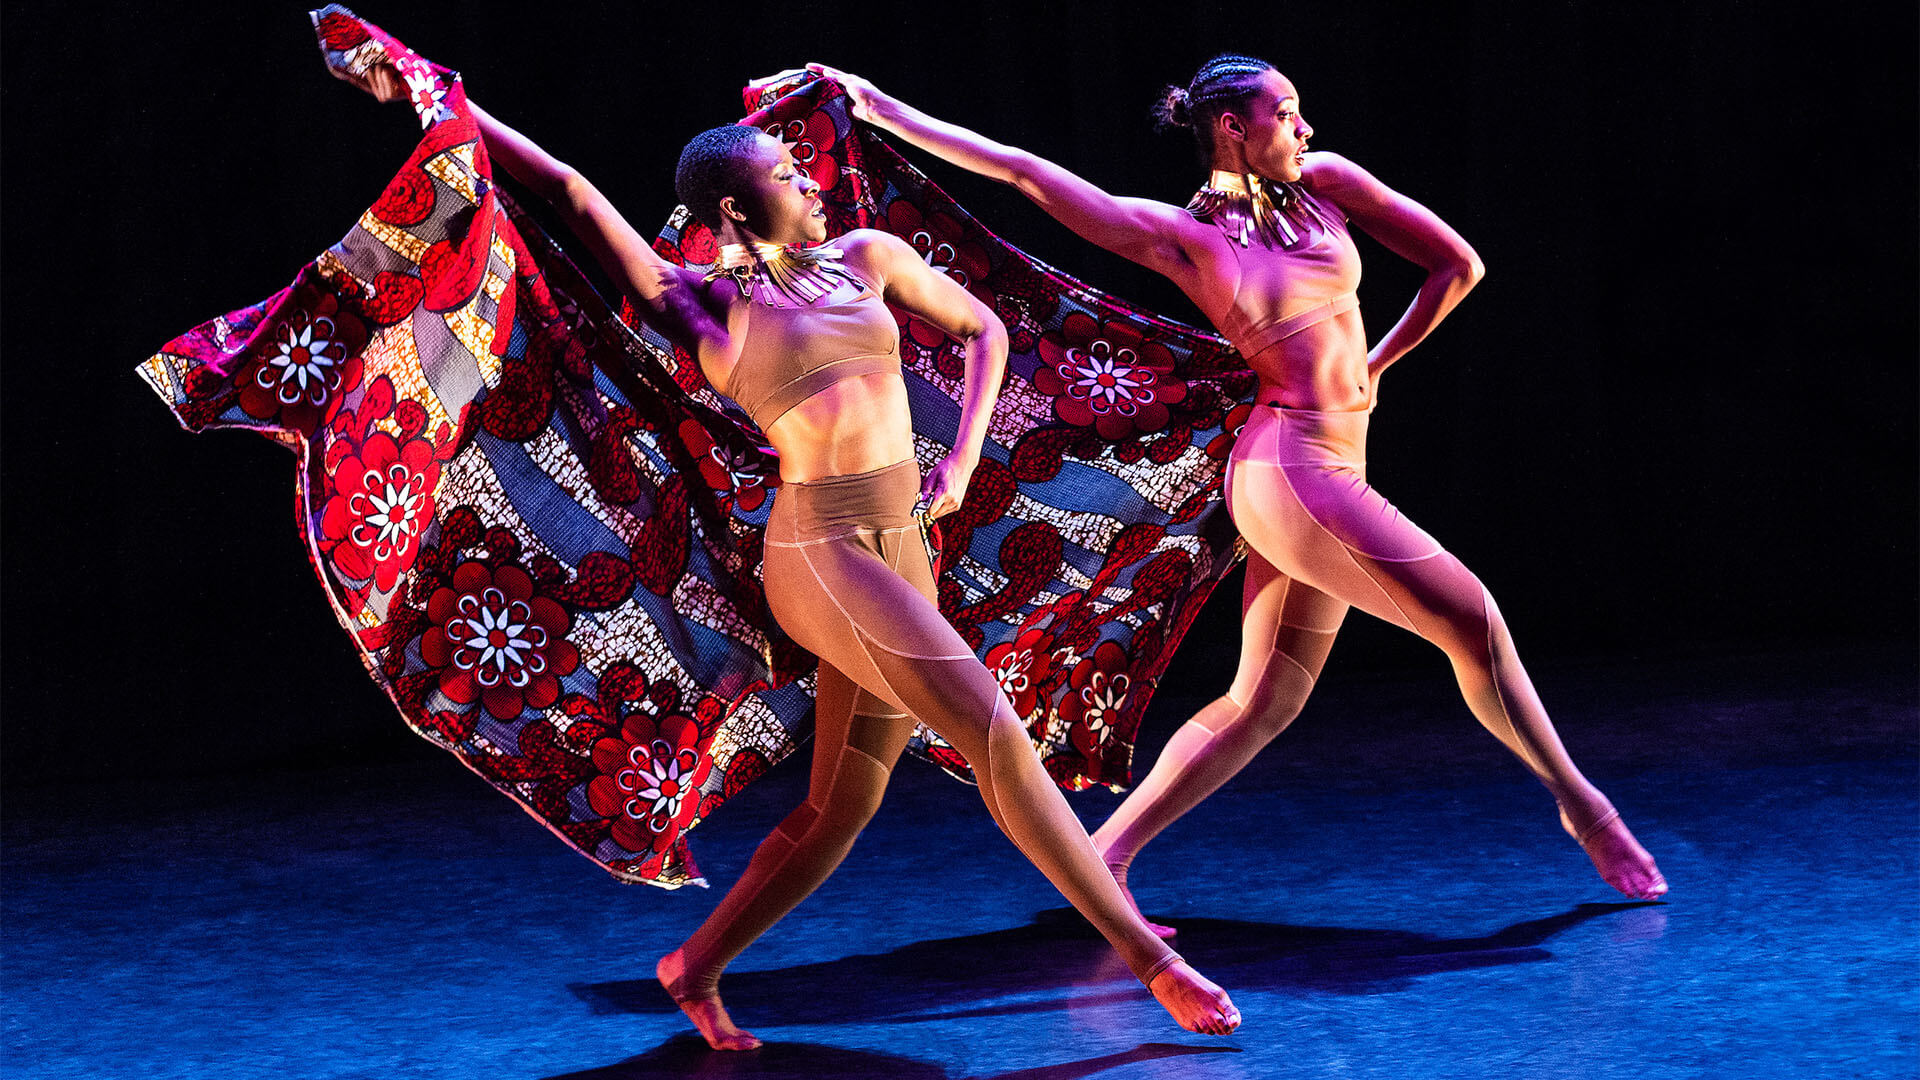 Two black women stride confidently on stage with their colourful burgundy, blue and red head wraps held powerfully behind them.